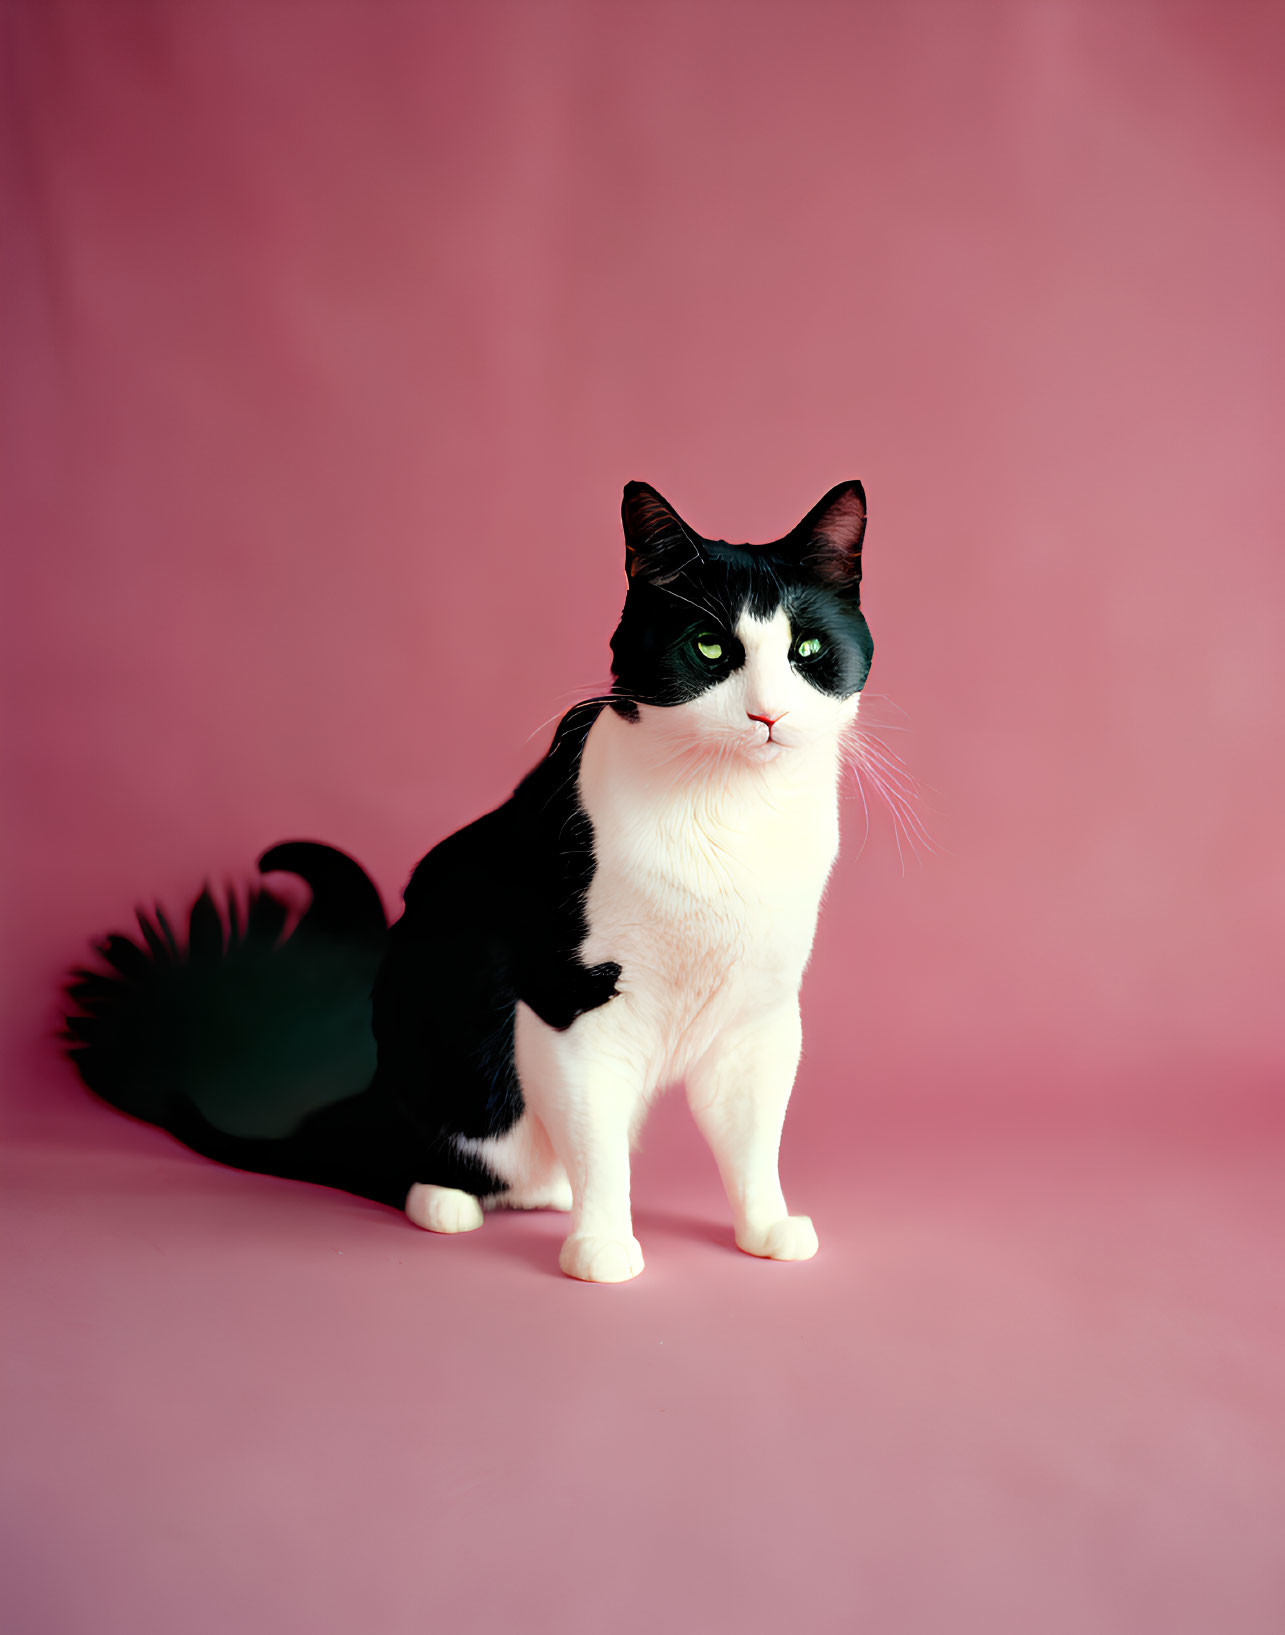 Black and white cat on pink background gazes at camera